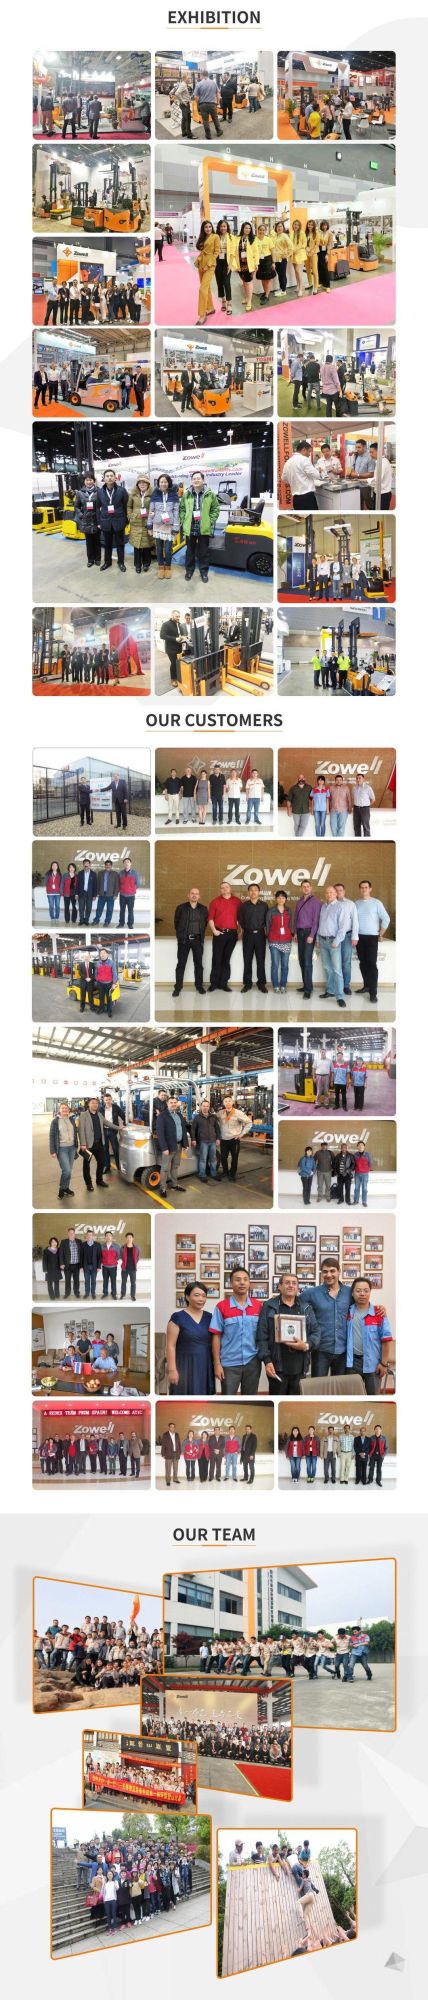 High Performance Self-Propelled ISO 9001 Approved Zowell Scissor Aerial Platform Table Hydraulic Lift